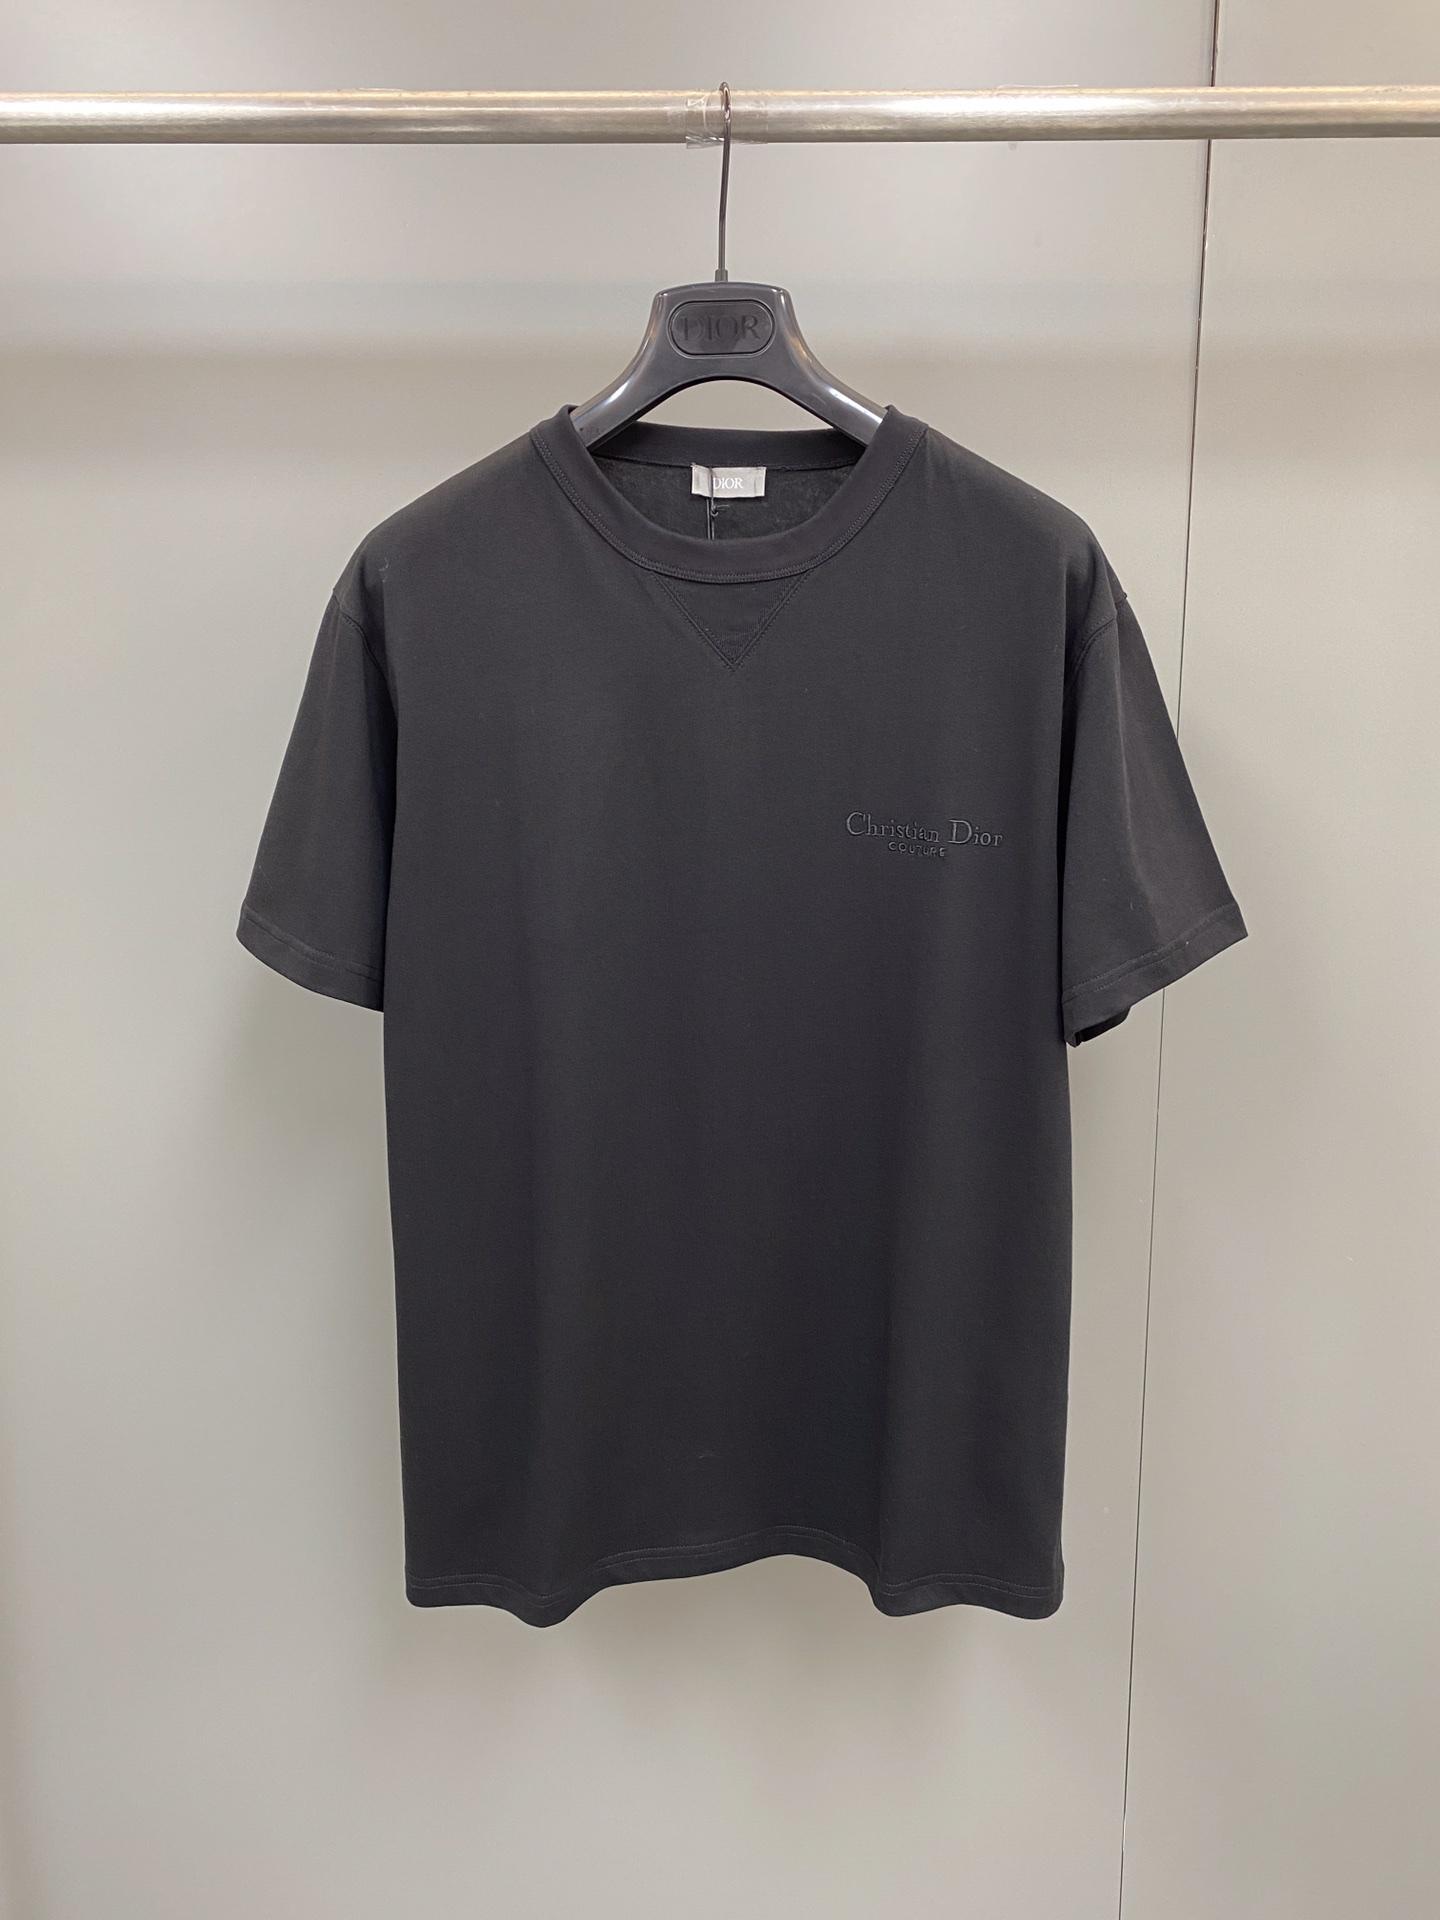 christian-dior-couture-t-shirt-relaxed-fit-5659_16845009622-1000